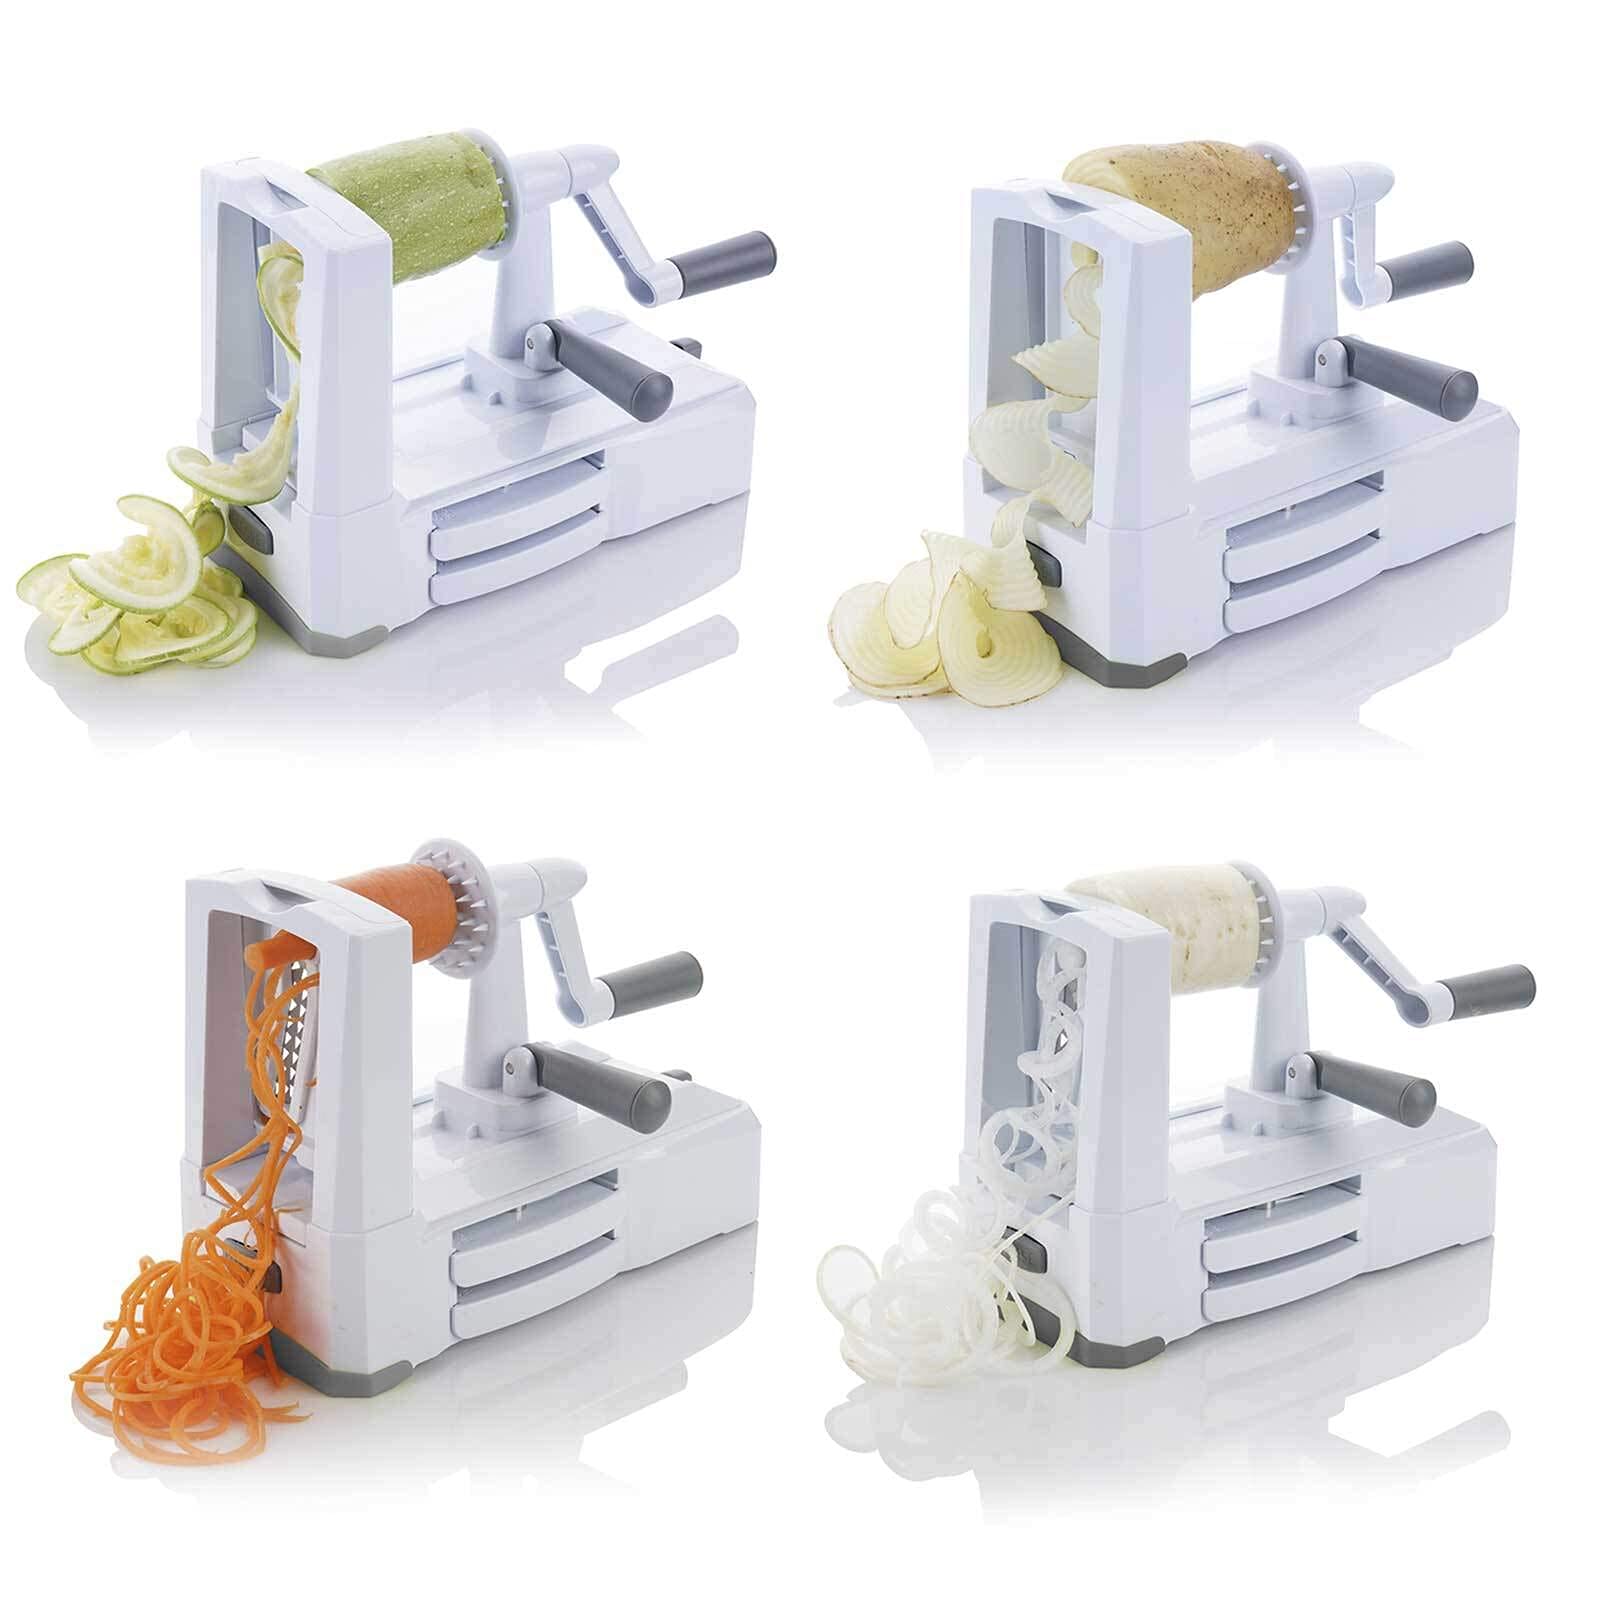 Spiralizer Ultimate 10 Strongest-and-Heaviest Duty Vegetable Slicer Best Veggie Pasta Spaghetti Maker for Keto/Paleo/Gluten-Free, With Extra Blade Caddy & 4 Recipe Ebook White